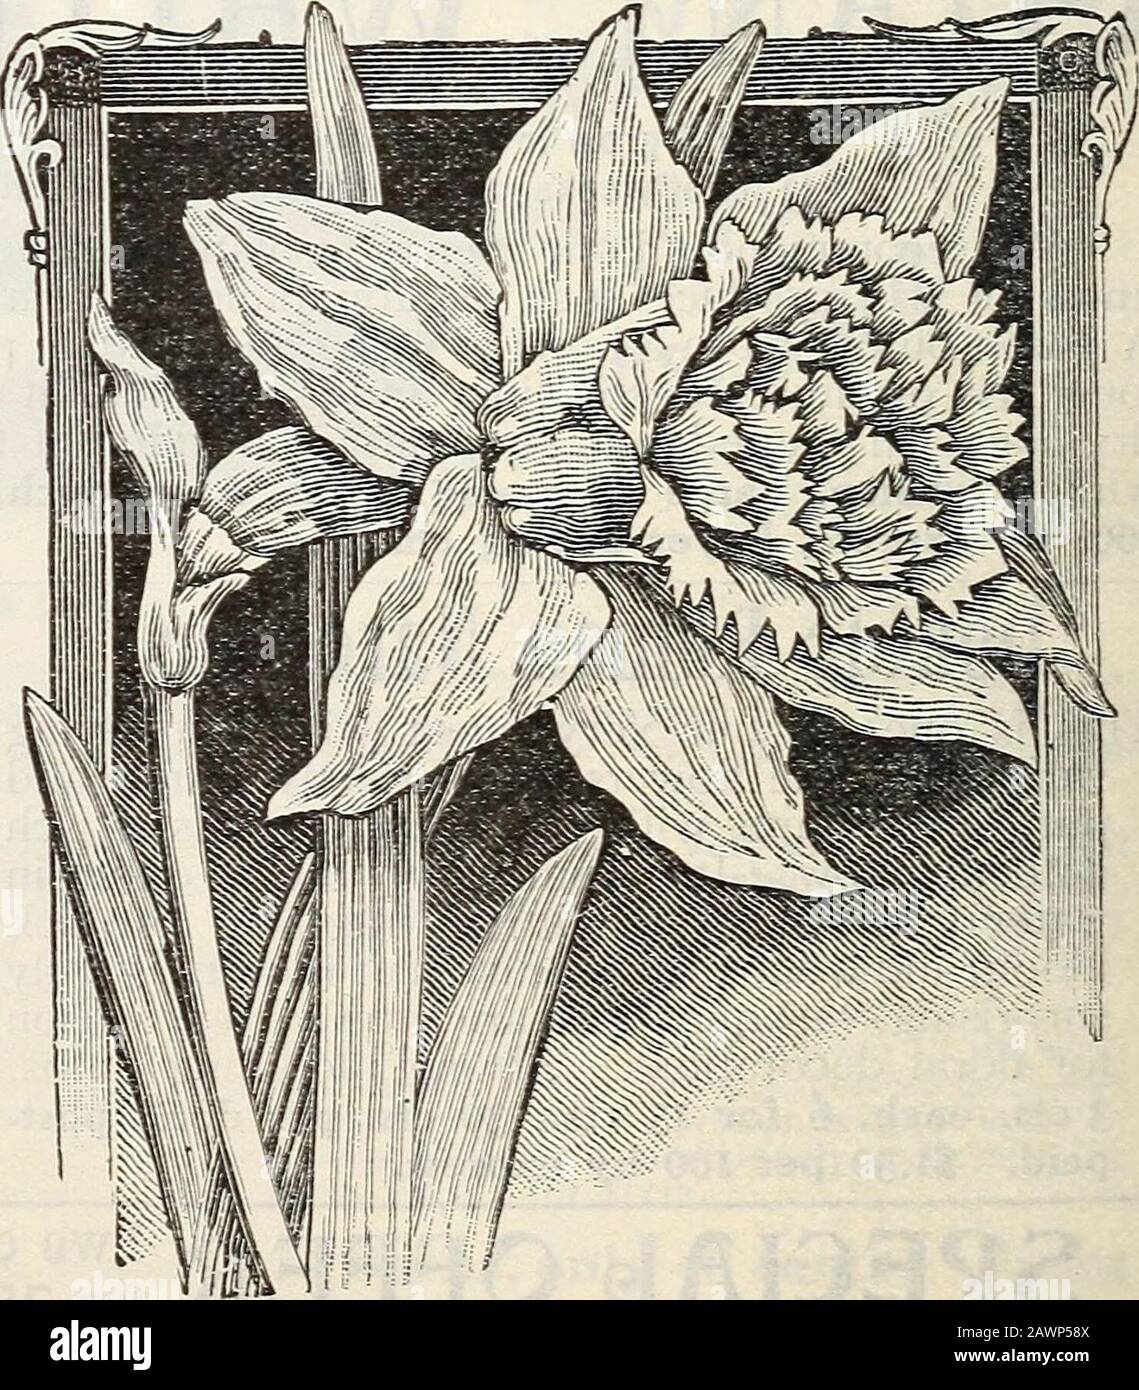 New floral guide : autumn 1901 . nly 65cts. Doable IlaFeissas oti Improved Daffodils ALBA PEEXA ODORATA—• The Double White Poets Nar cissus, or Gardenia-Flowered Daffodils. Double snow-white gardenia-like flow^ers, delightfully sweet-scented. 3 cts. each 3 for 8 cts., 25 cts. per doz., postpaid.INCOaiPARABLI^Fl. PI. Large handsome flowers, as double as roses, bright canary yellow, with rich orange centre. 3 cts each, 3 for 8 cts., 25 cts. per doz., postpaid.SUEPHUR OR SELTER PHCEXIX—Creamy white with pale sulphur centre. Considered the finest of the double sorts. 12 cts. each, 3 for 35 cts., $ Stock Photo